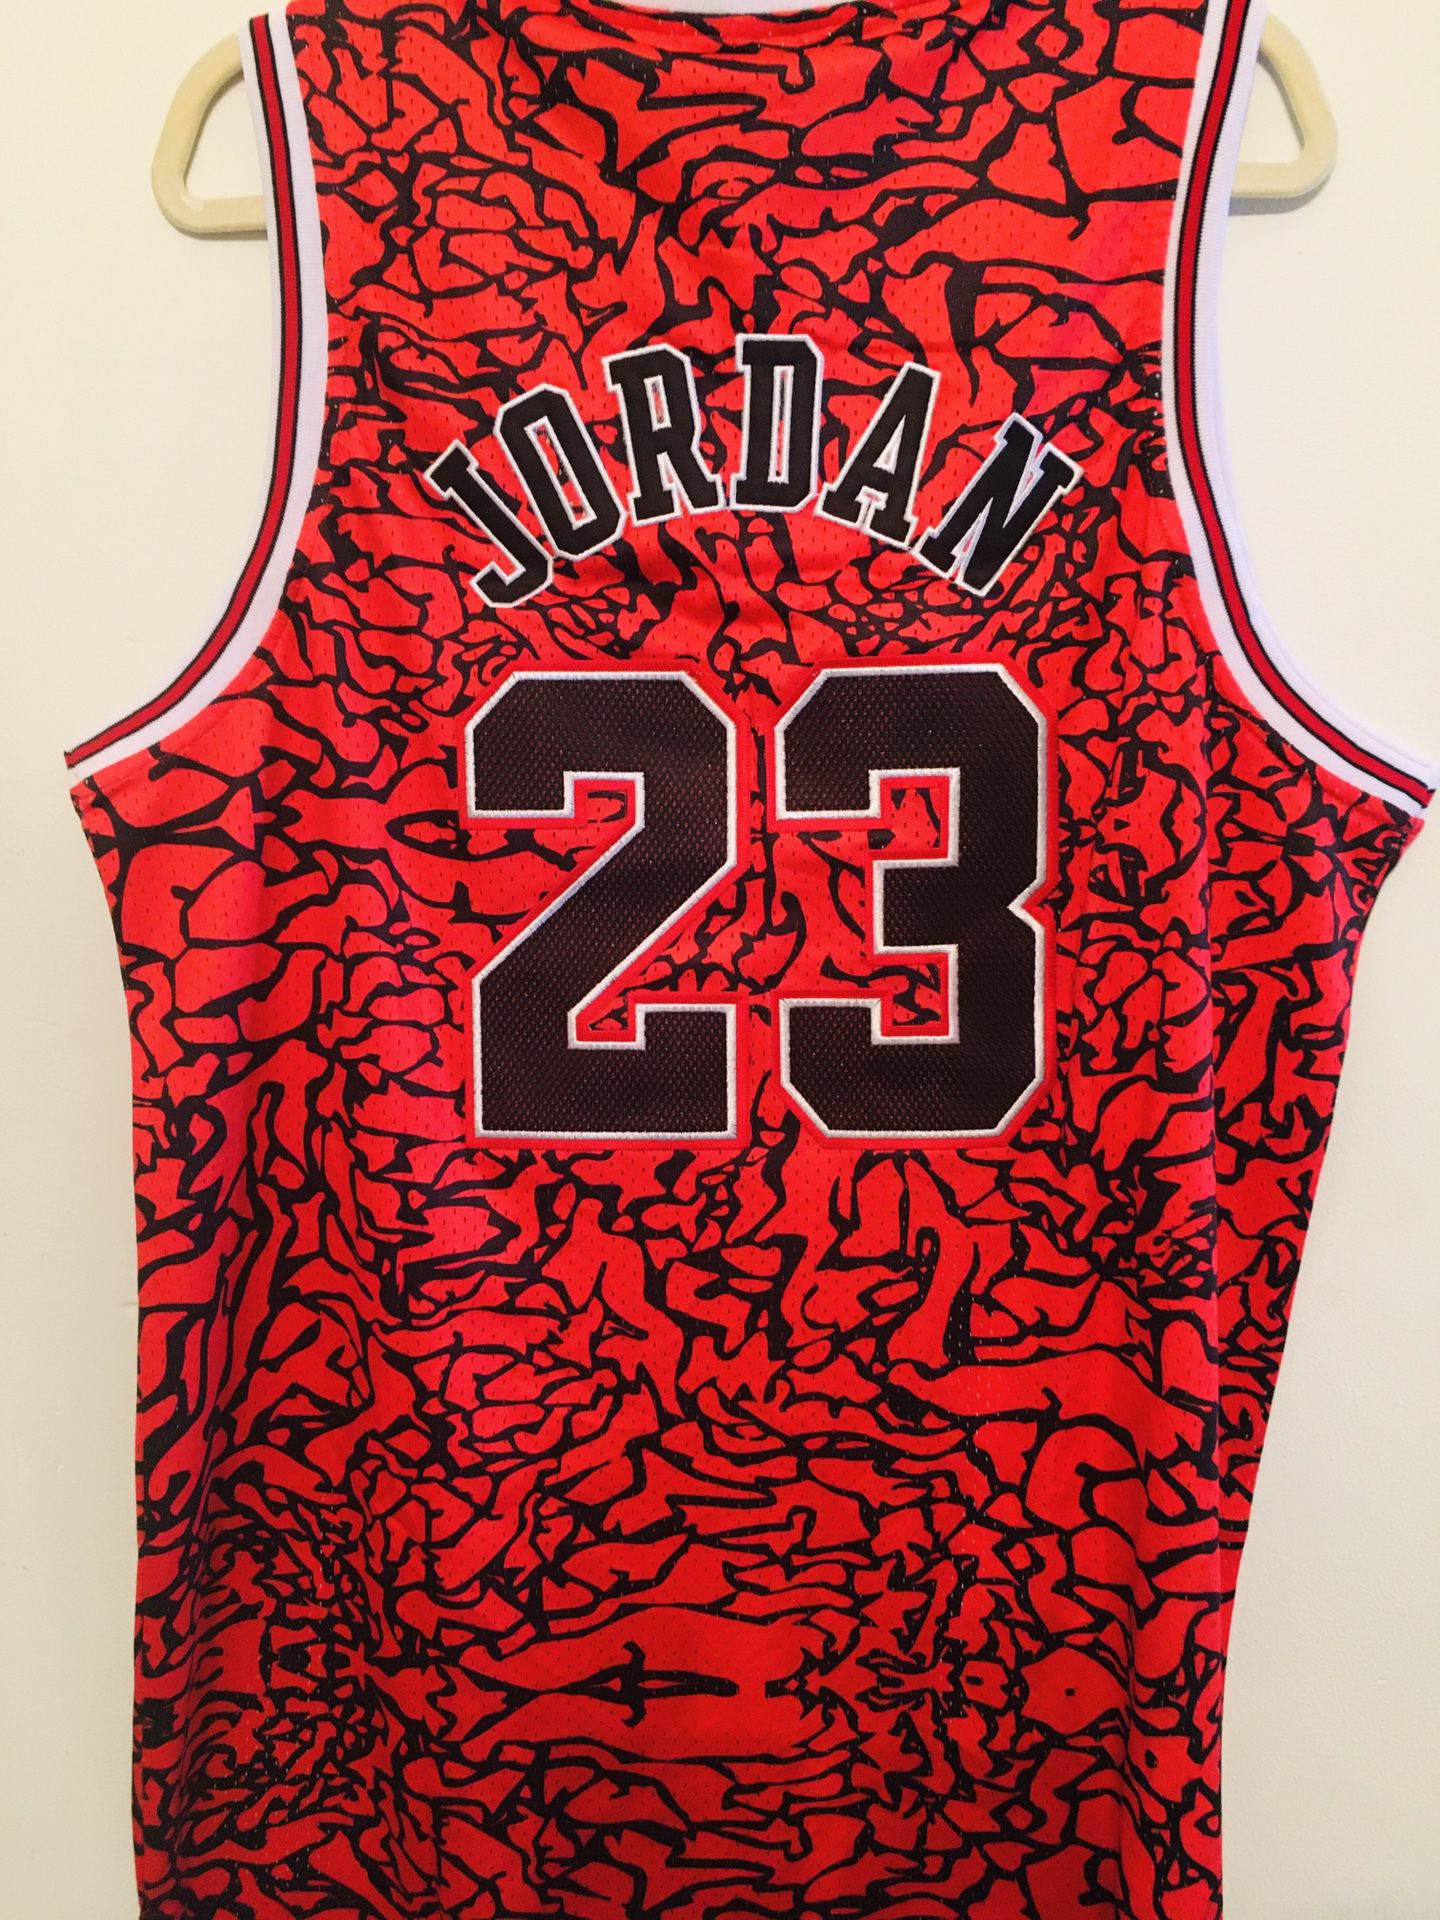 3 Jordan jersey combo ad with Priority 2 day shipping